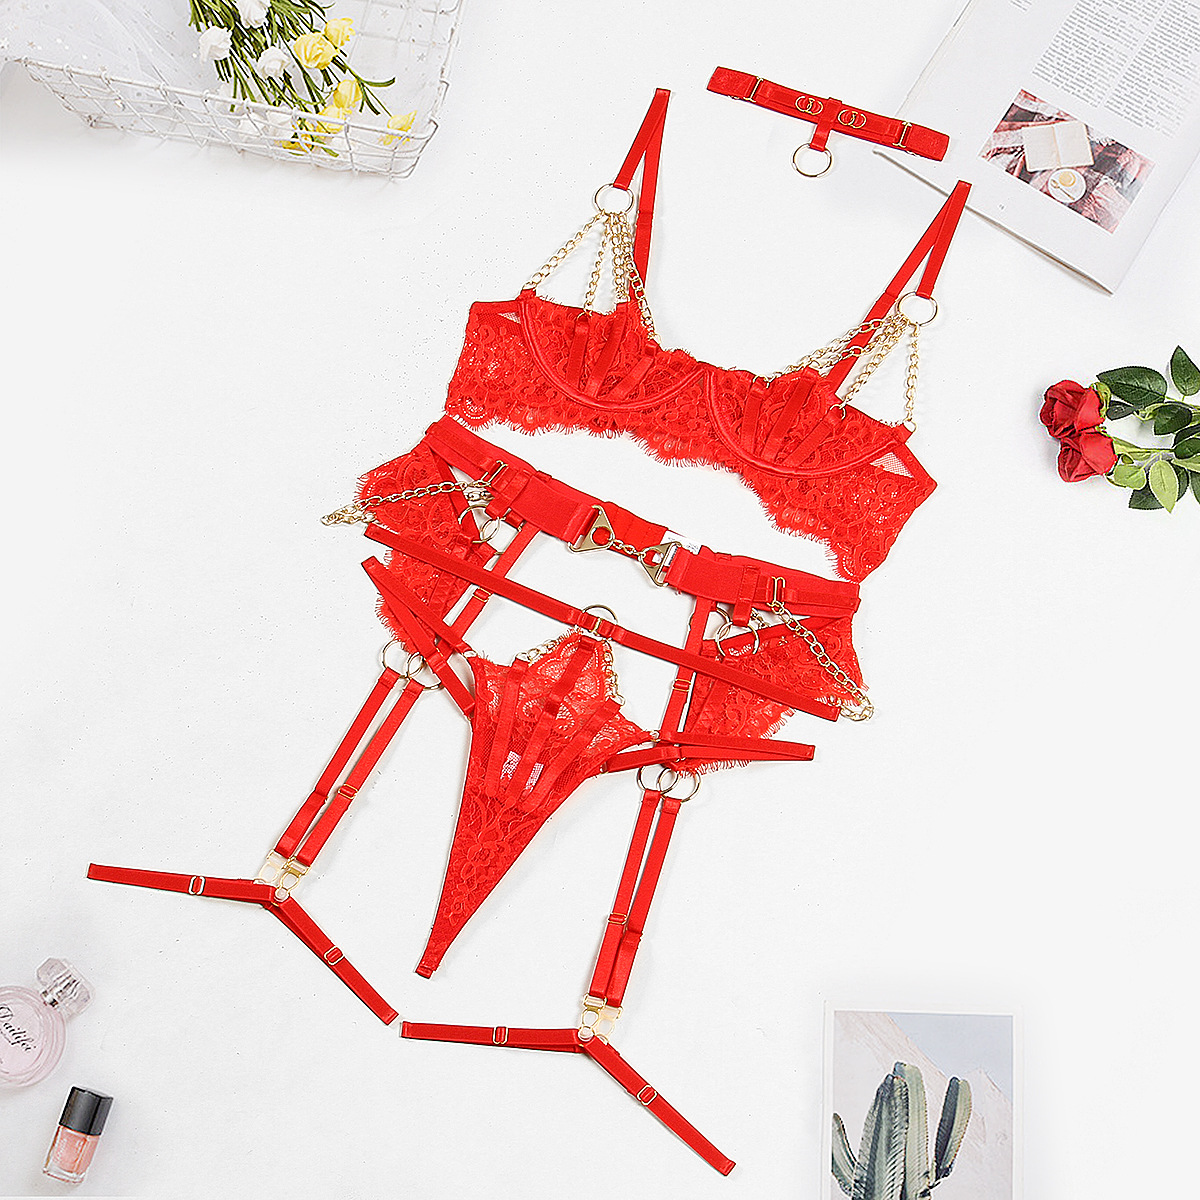 Intricate Hollow Out Half Cup Red Lace Lingerie Set